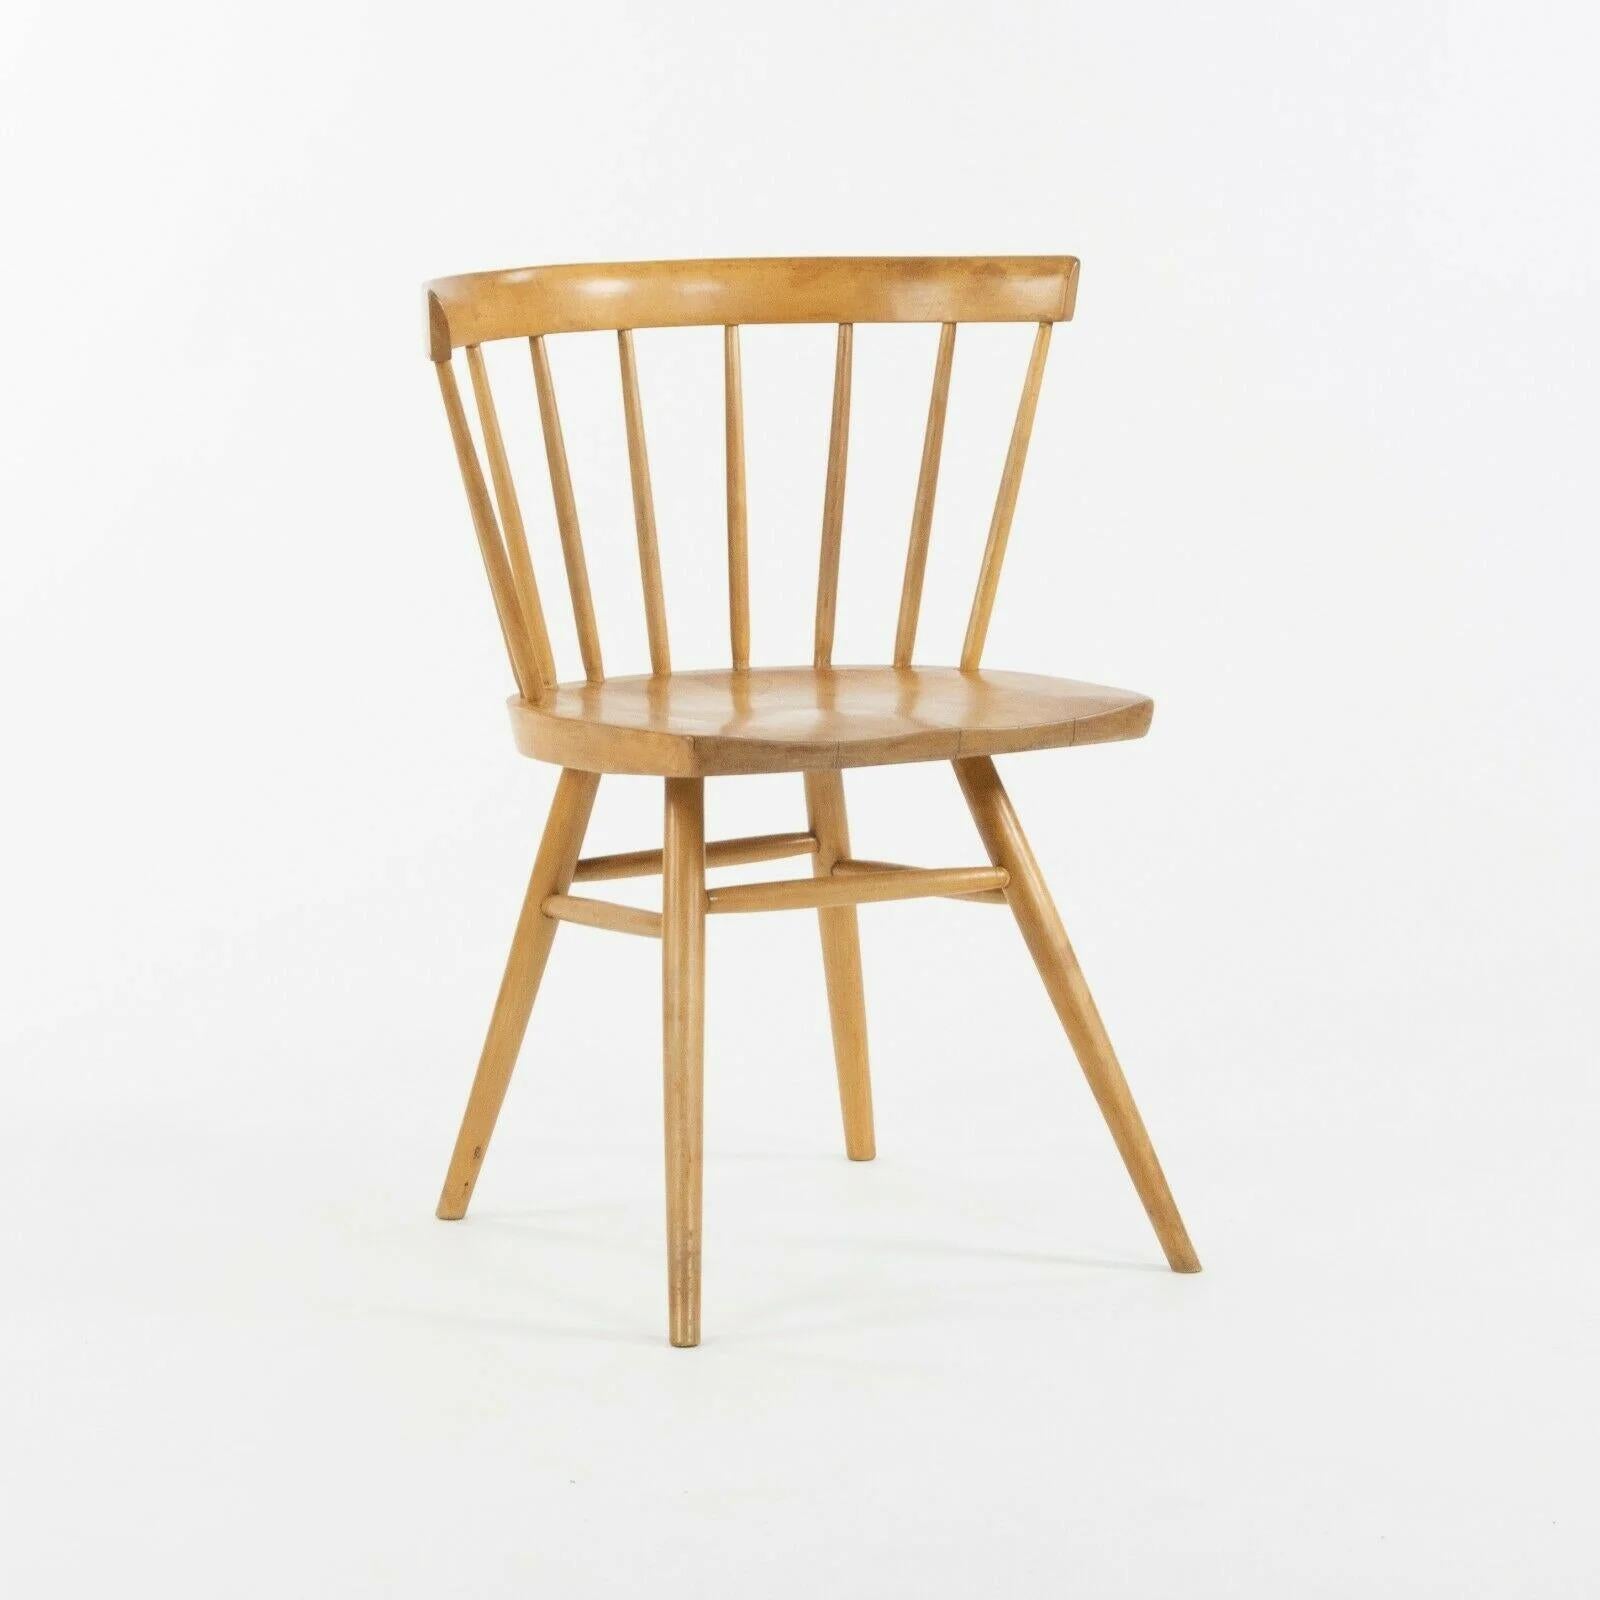 Listed for sale is a gorgeous early George Nakashima for Knoll N19 birch straight chair, produced by Knoll Associates. This chair appears to be natural birch. It shows some wear from use as can be seen in the photos. Some light scratches and other